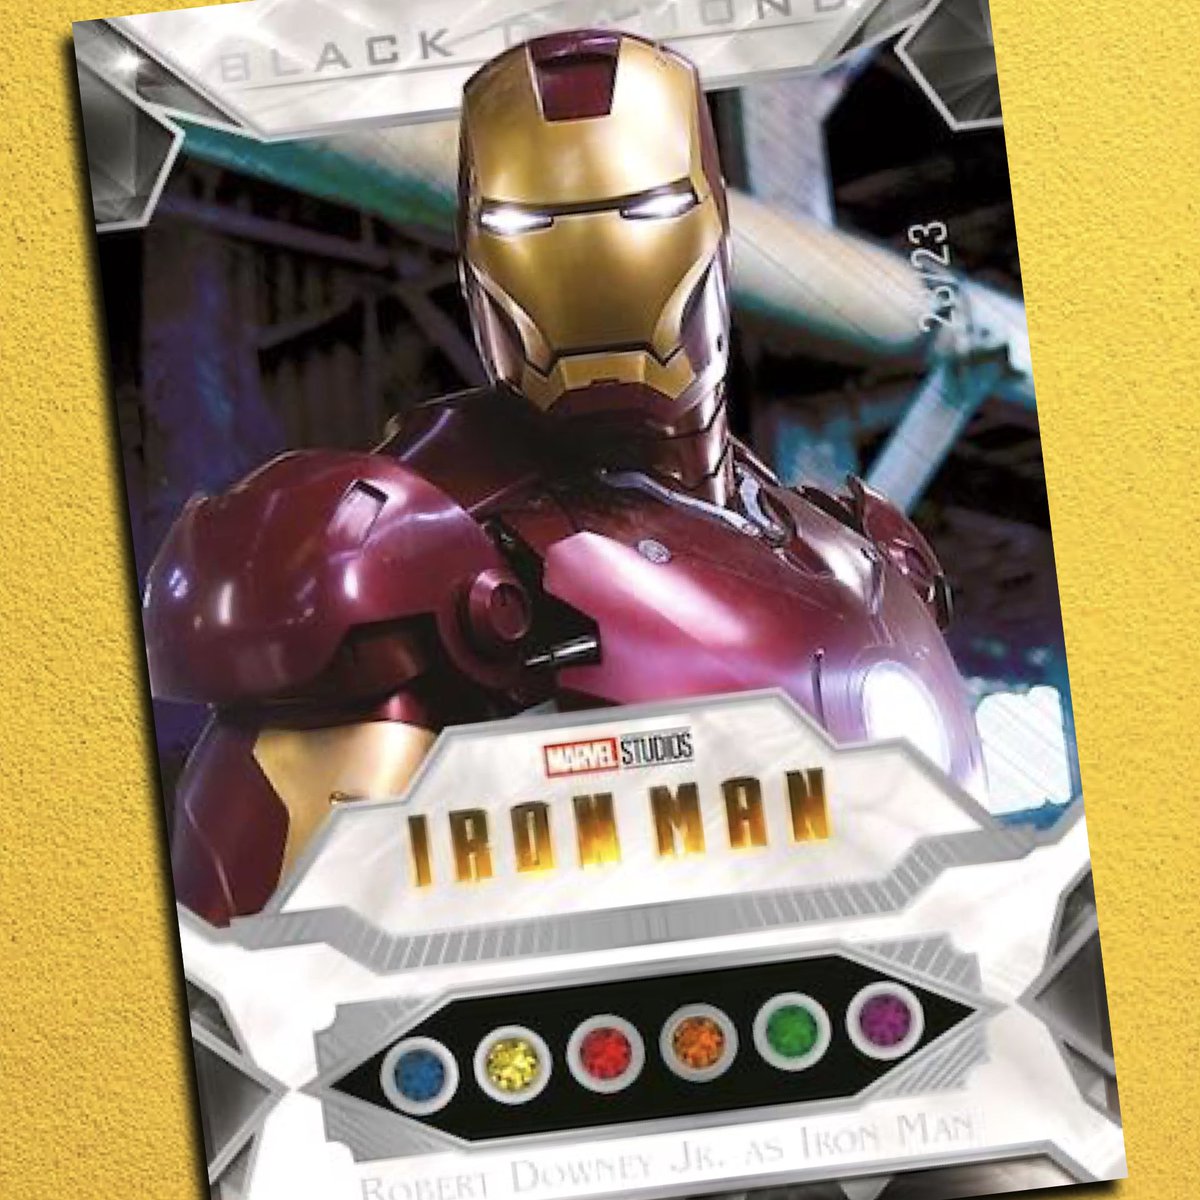 16 years ago today, #IronMan was released in theaters!

Do you have any Marvel/MCU trading cards? Let's see some 👀📸👇